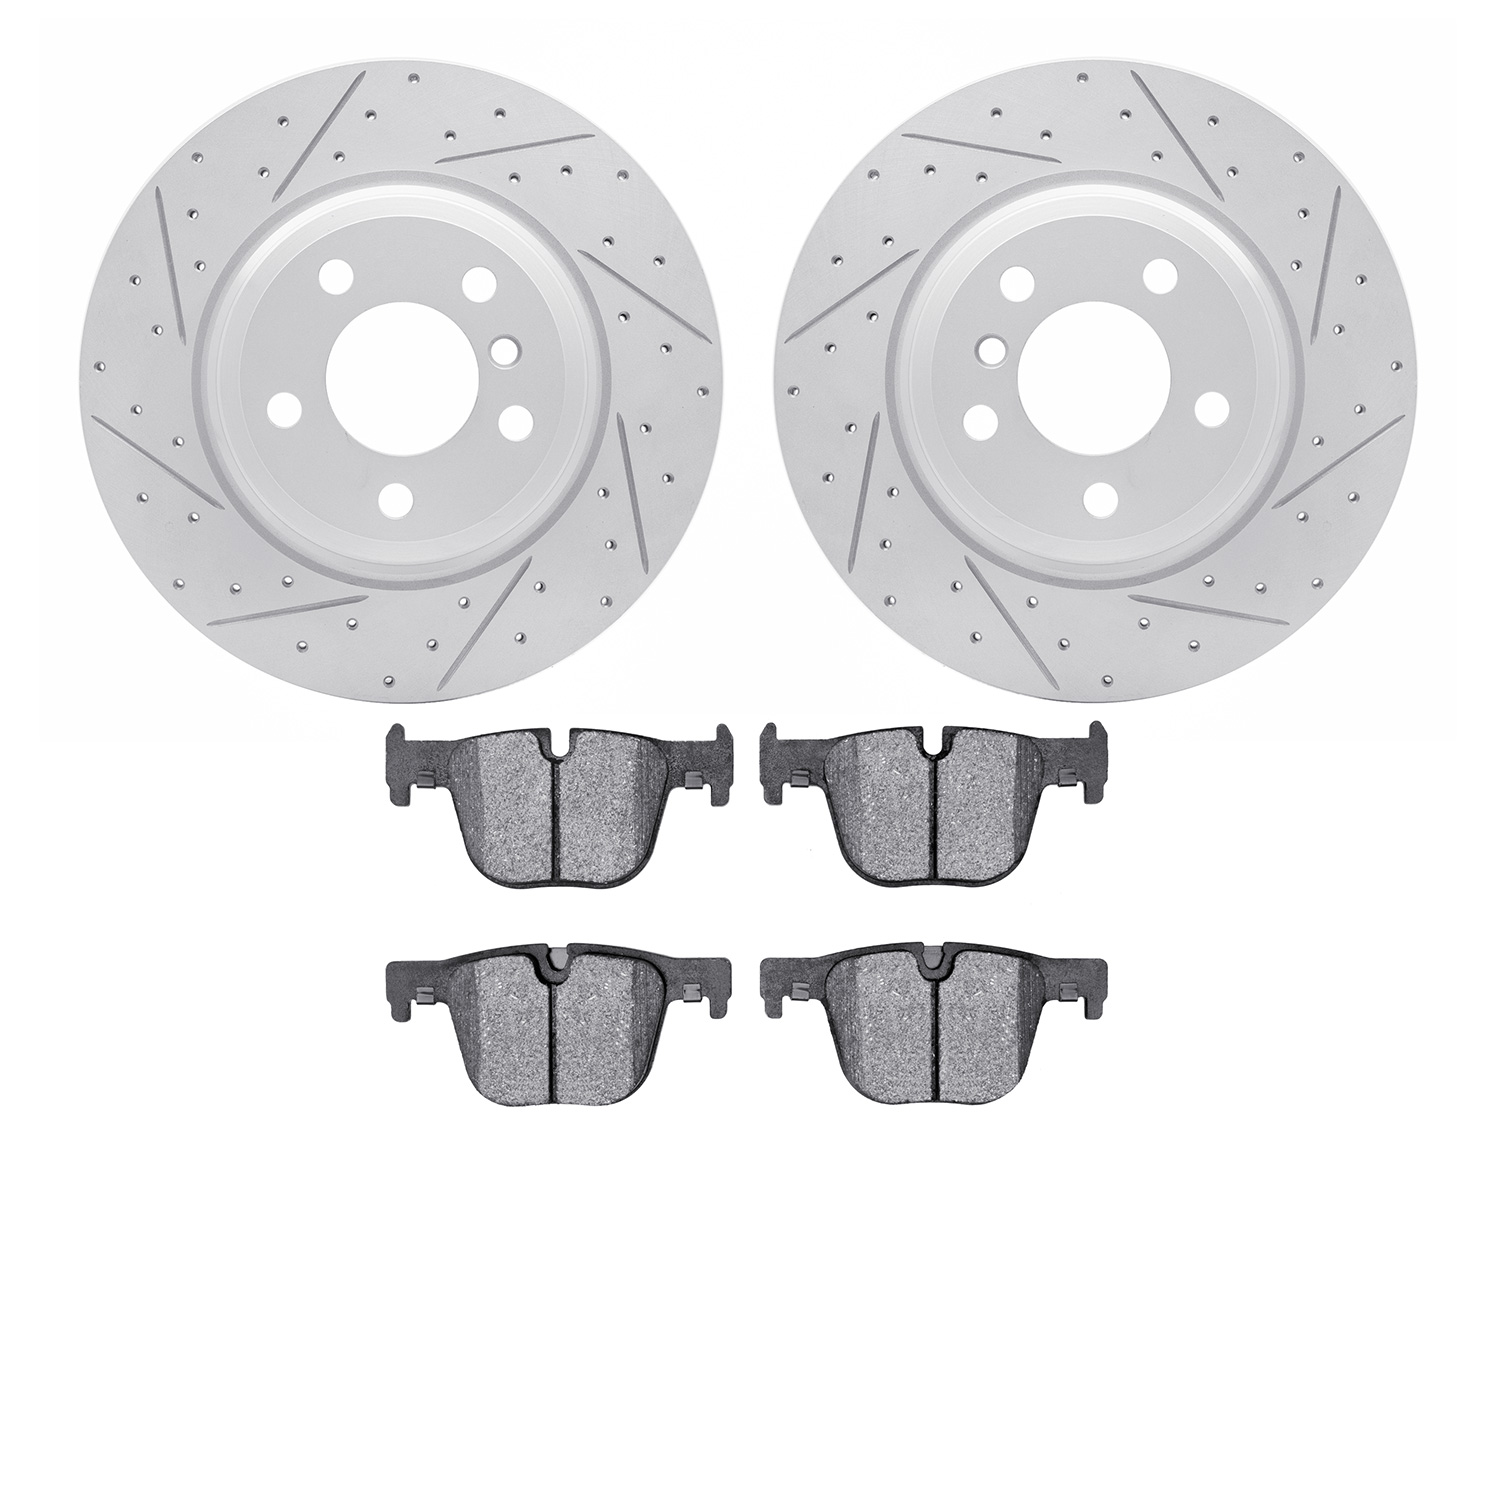 2502-31094 Geoperformance Drilled/Slotted Rotors w/5000 Advanced Brake Pads Kit, 2012-2020 BMW, Position: Rear